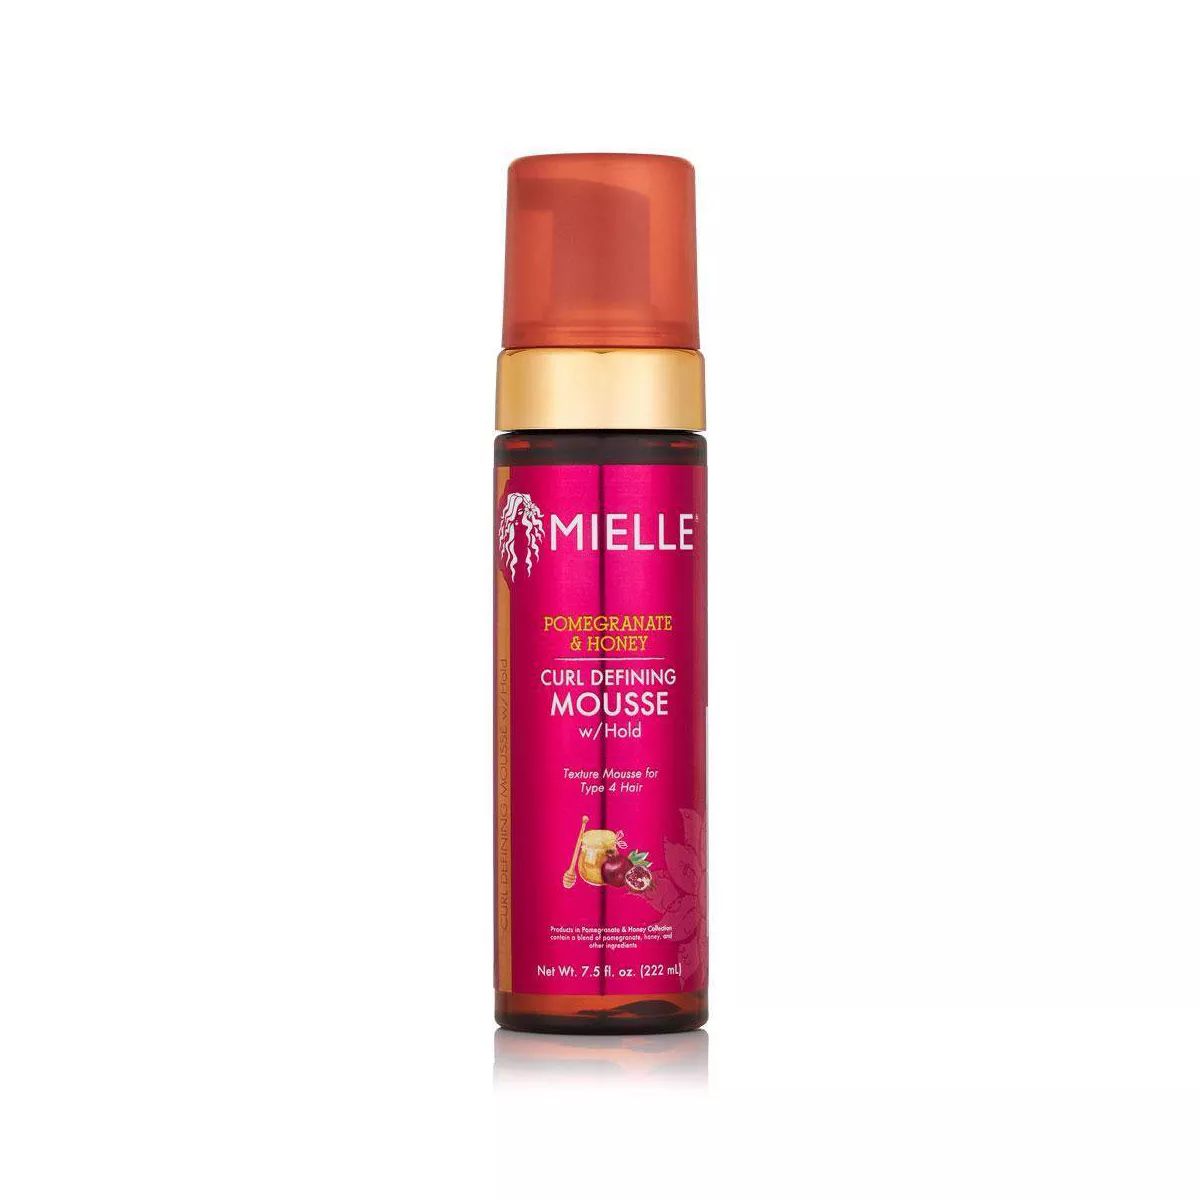 Mielle Organics Pomegranate and Honey Curl Defining Mousse with Hold - 7.5 fl oz | Target